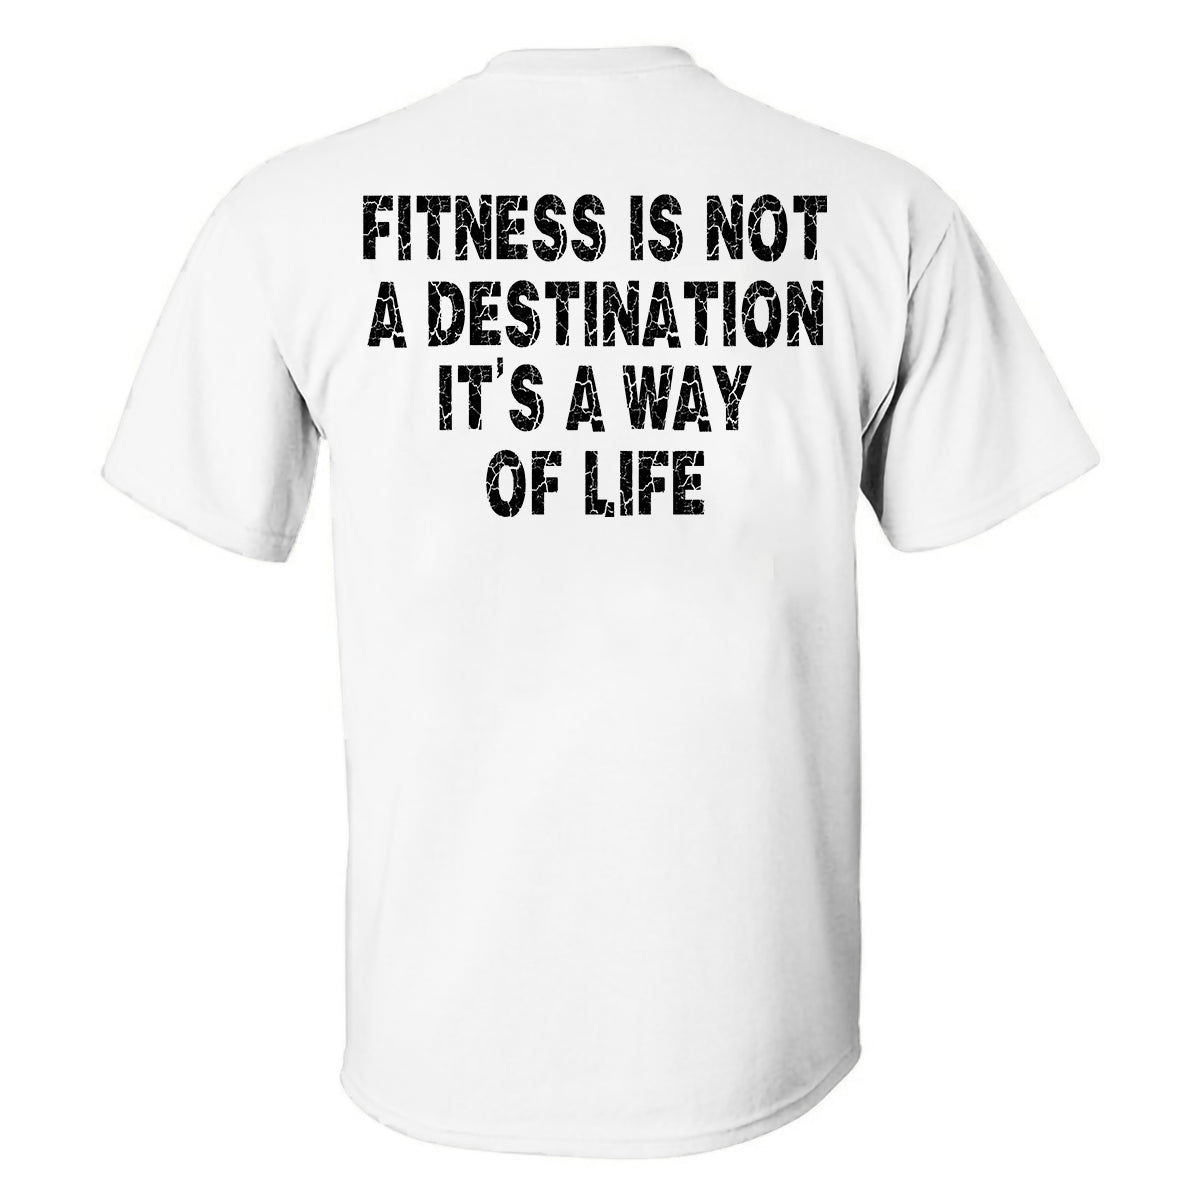 Fitness Is Not A Destination It's A Way Of Life Printed Men's T-shirt